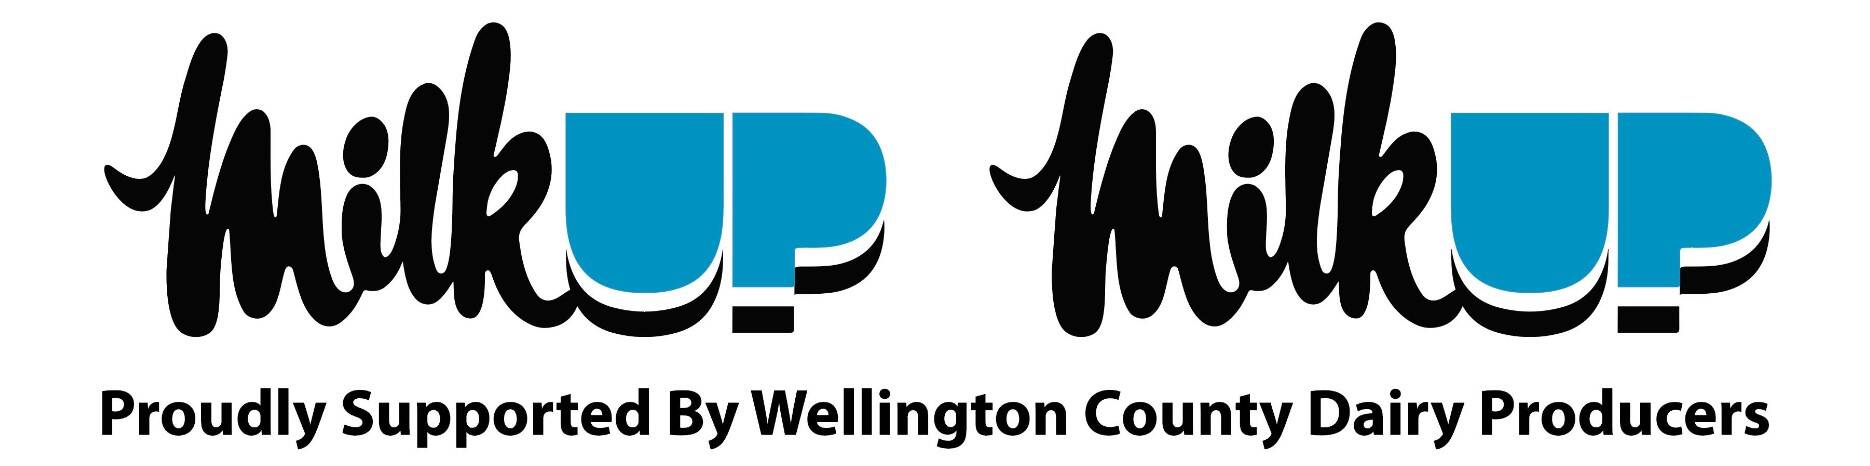 Wellington County Dairy Producers